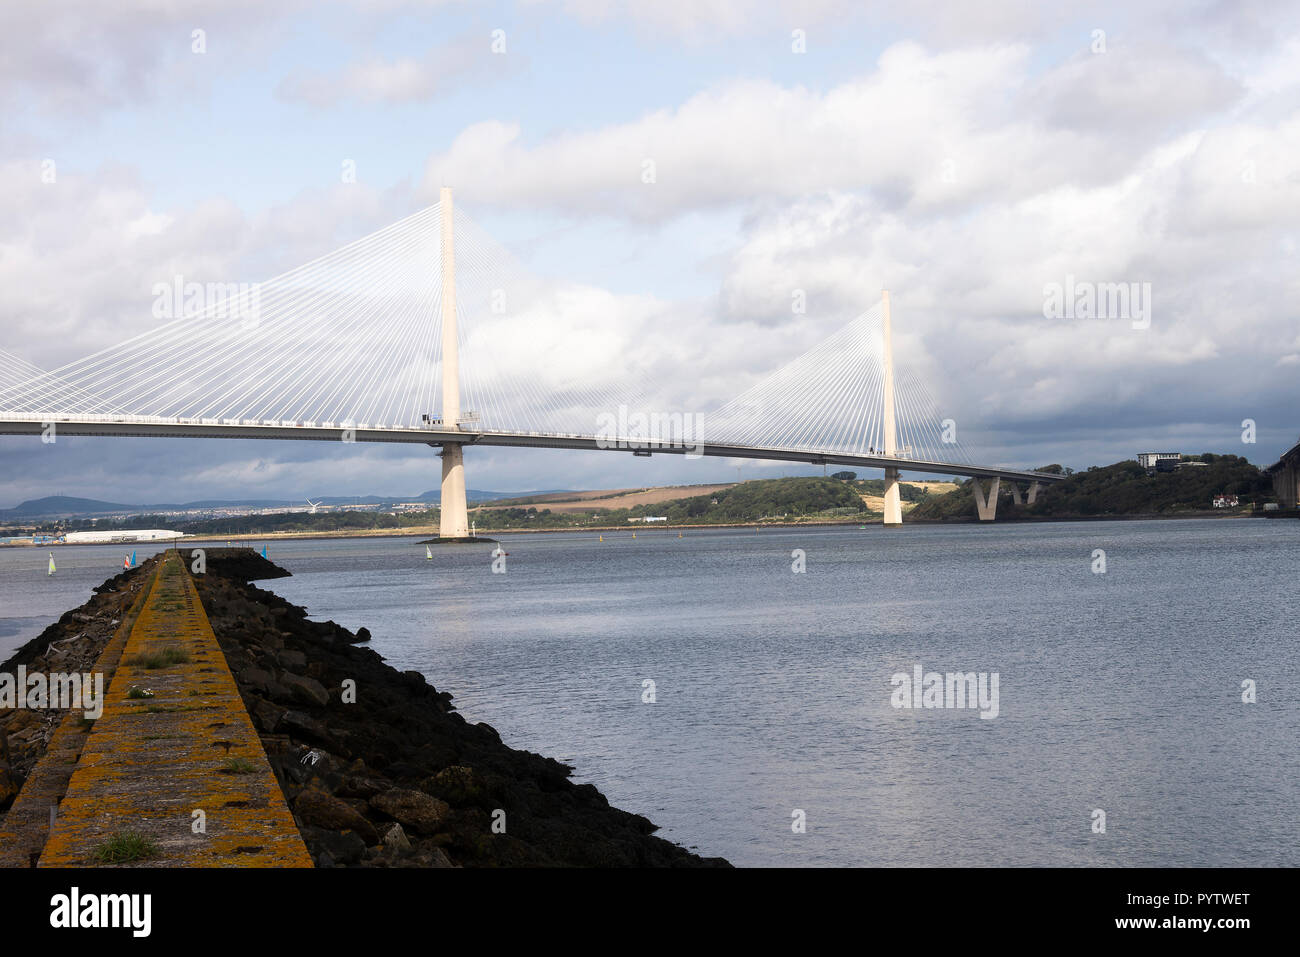 The New Queensferry Road Bridge Crossing the Firth of Forth Between Edinburgh and South Queensferry Scotland United Kingdom UK Stock Photo